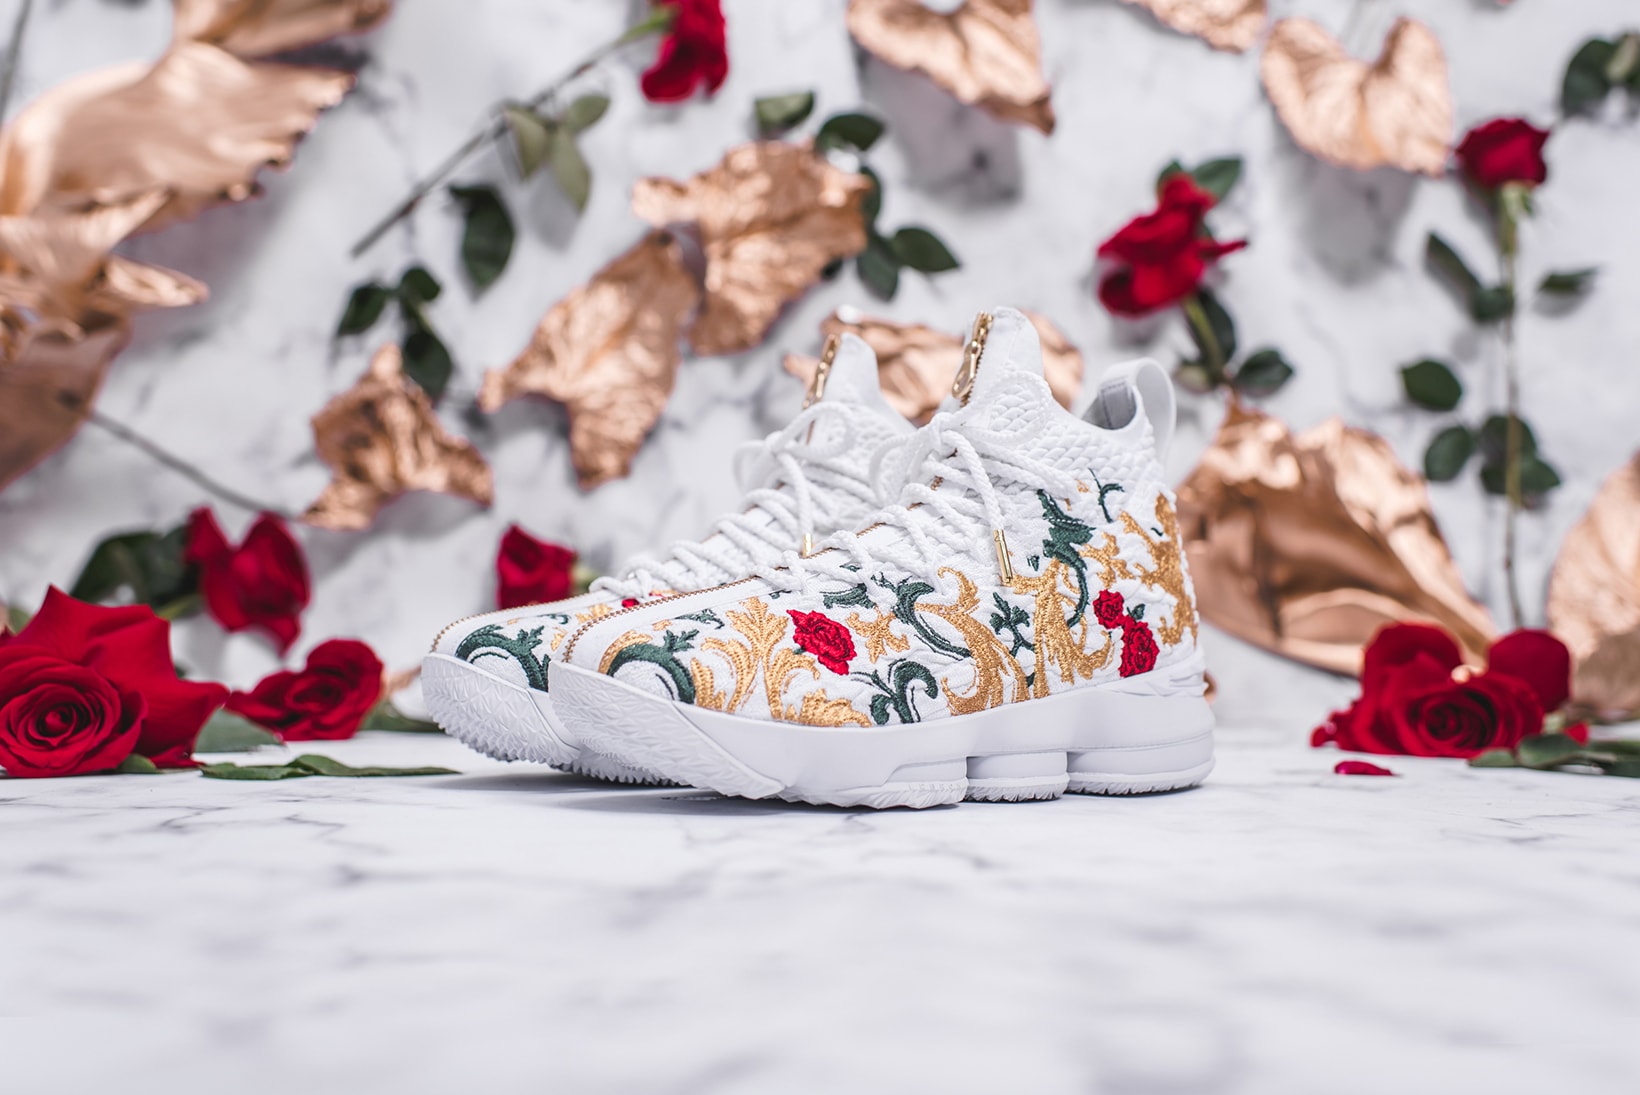 KITH Long Live the King Collection Chapter 2 LeBron James Ronnie Fieg Nike Basketball 15 xv sneakers black floral flower embroidery embroider white green gold red los angles all star weekend nba release info